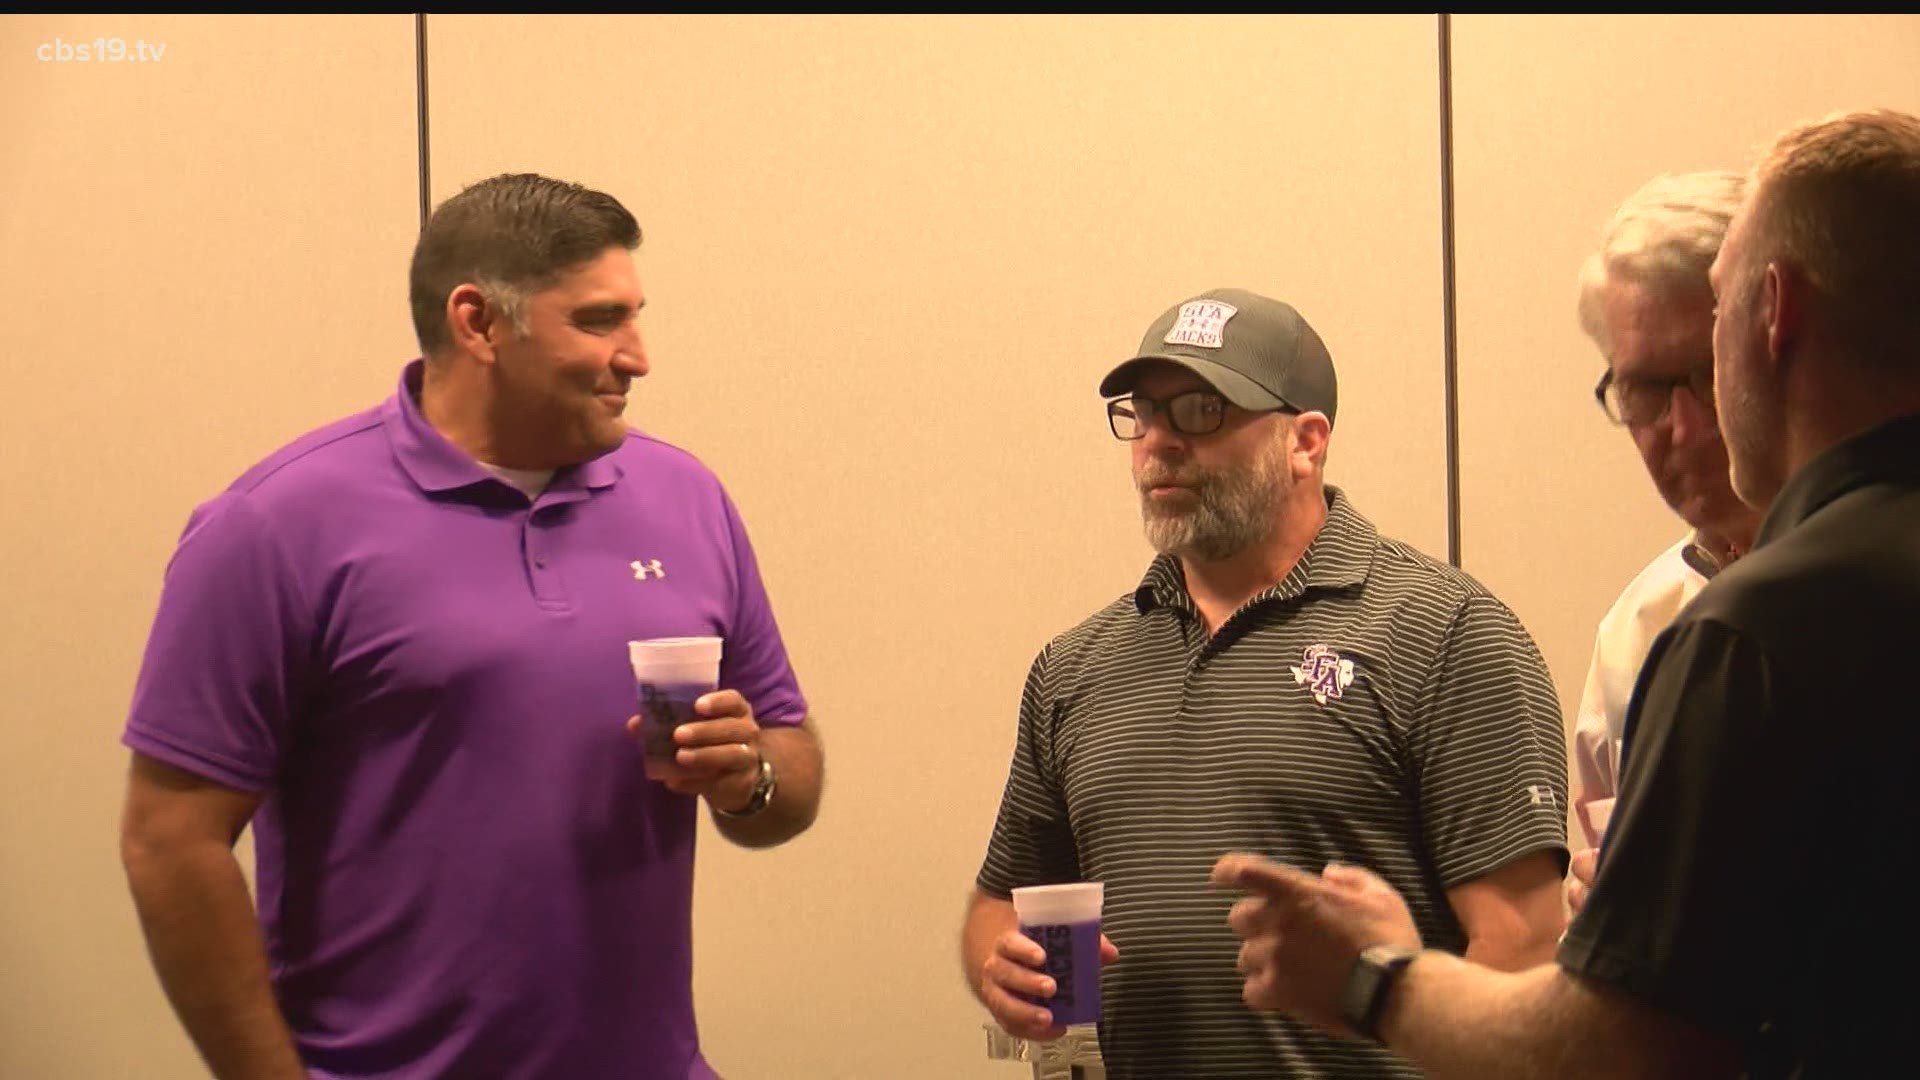 SFA Athletic Director Ryan Ivey as well as Colby Carthel & Kyle Keller highlight the big names that showed up to attend SFA alumni function in Tyler.